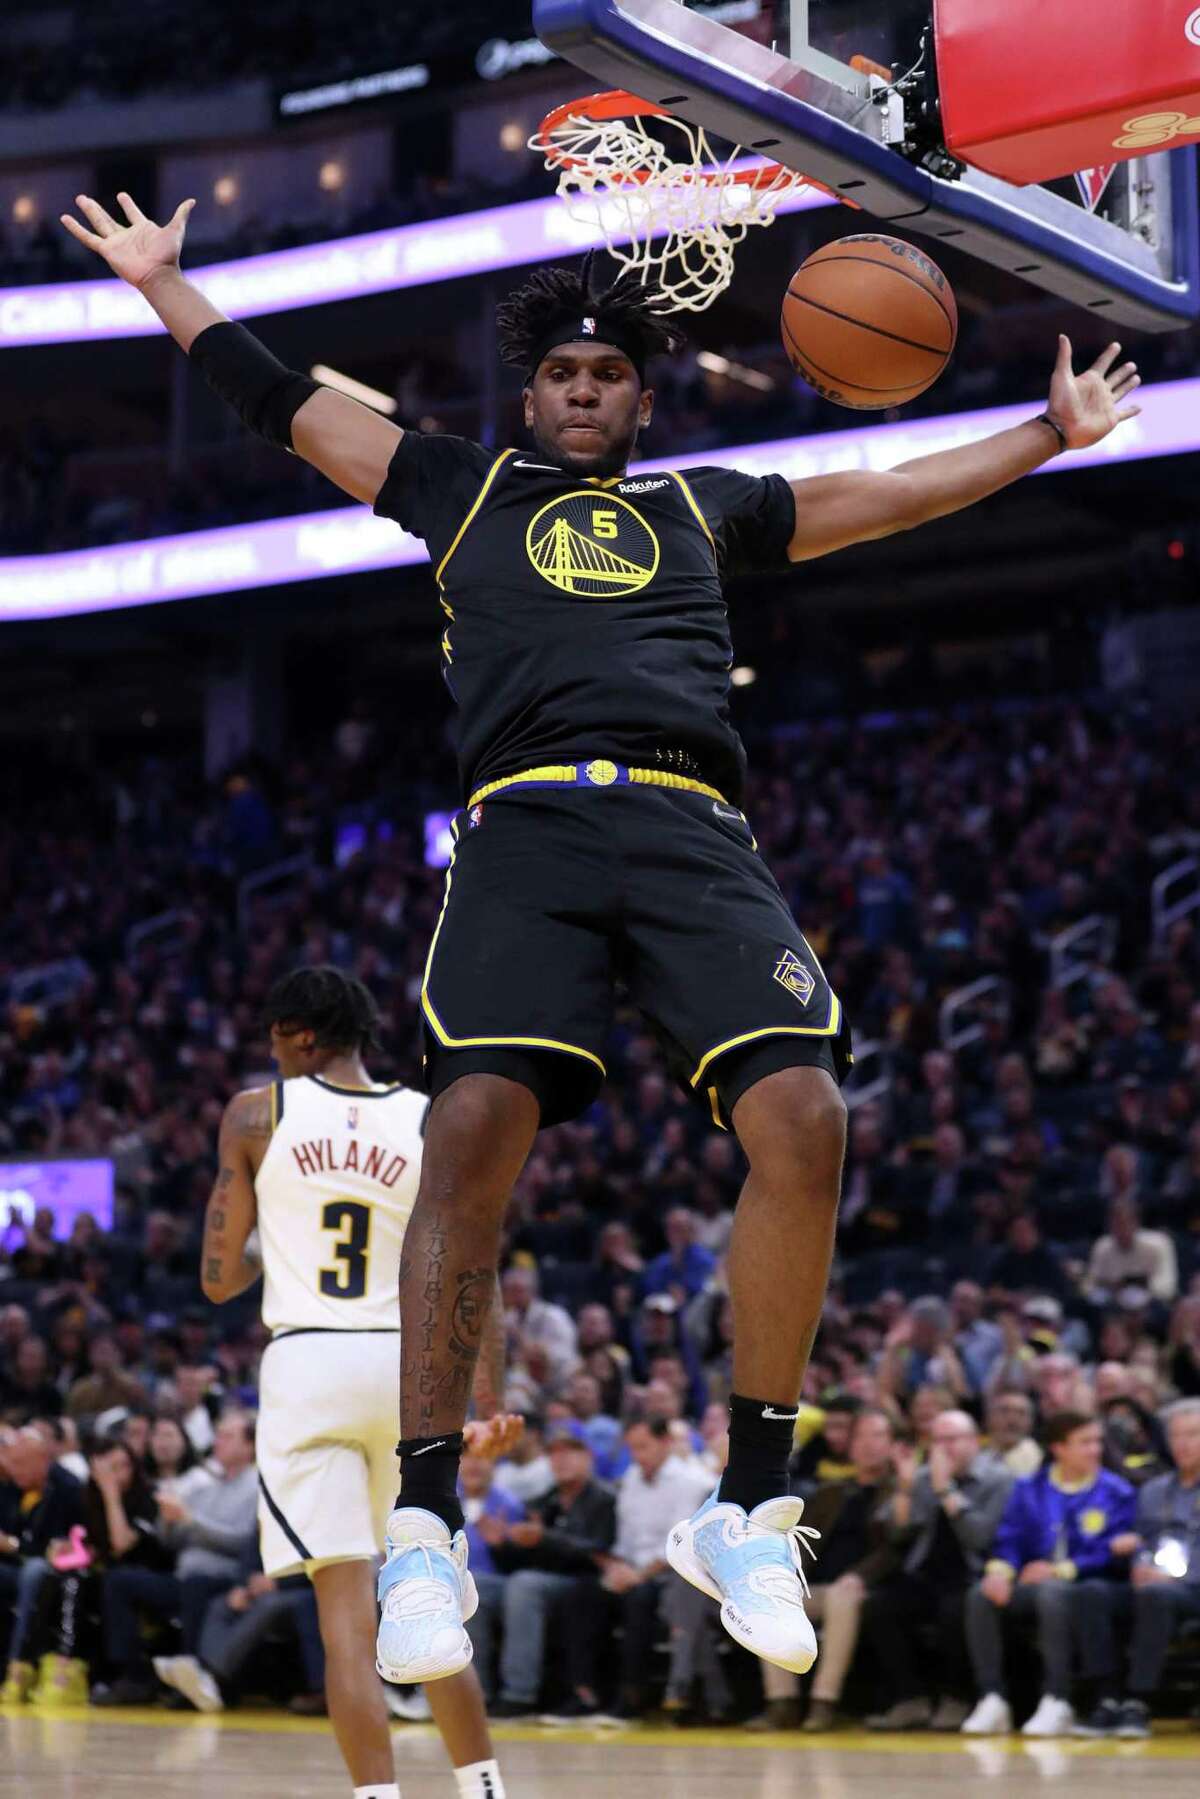 Golden State Warriors’ Kevon Looney dunks against Denver Nuggets in 2nd quarter during Game 5 of NBA Western Conference First Round playoff game at Chase Center in San Francisco, Calif, on Wednesday, April 27, 2022.